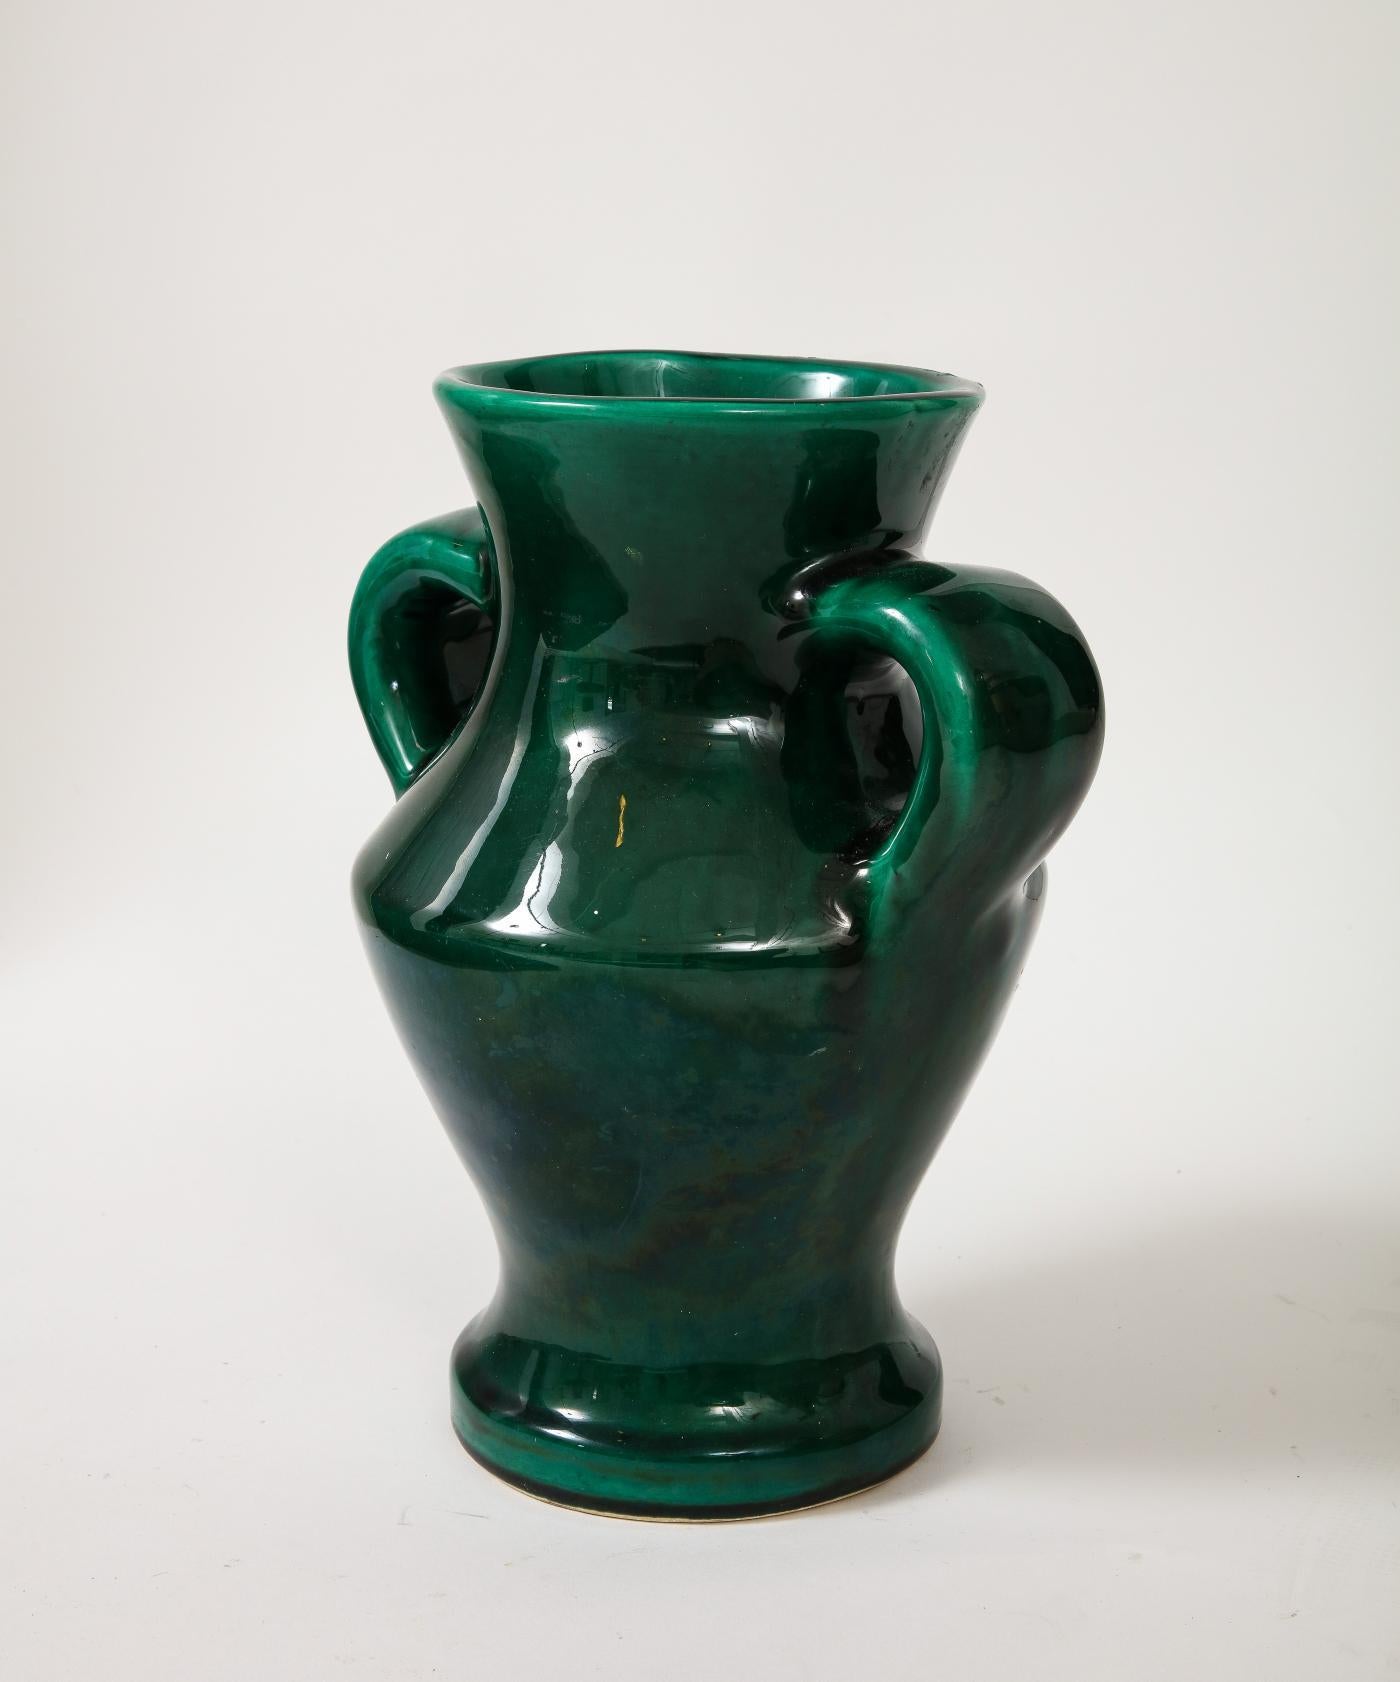 Glazed Ceramic Vase by Roger Capron, France, c. 1960

Striking, beautifully-glazed vase by Roger Capron in a very satisfying deep green.
